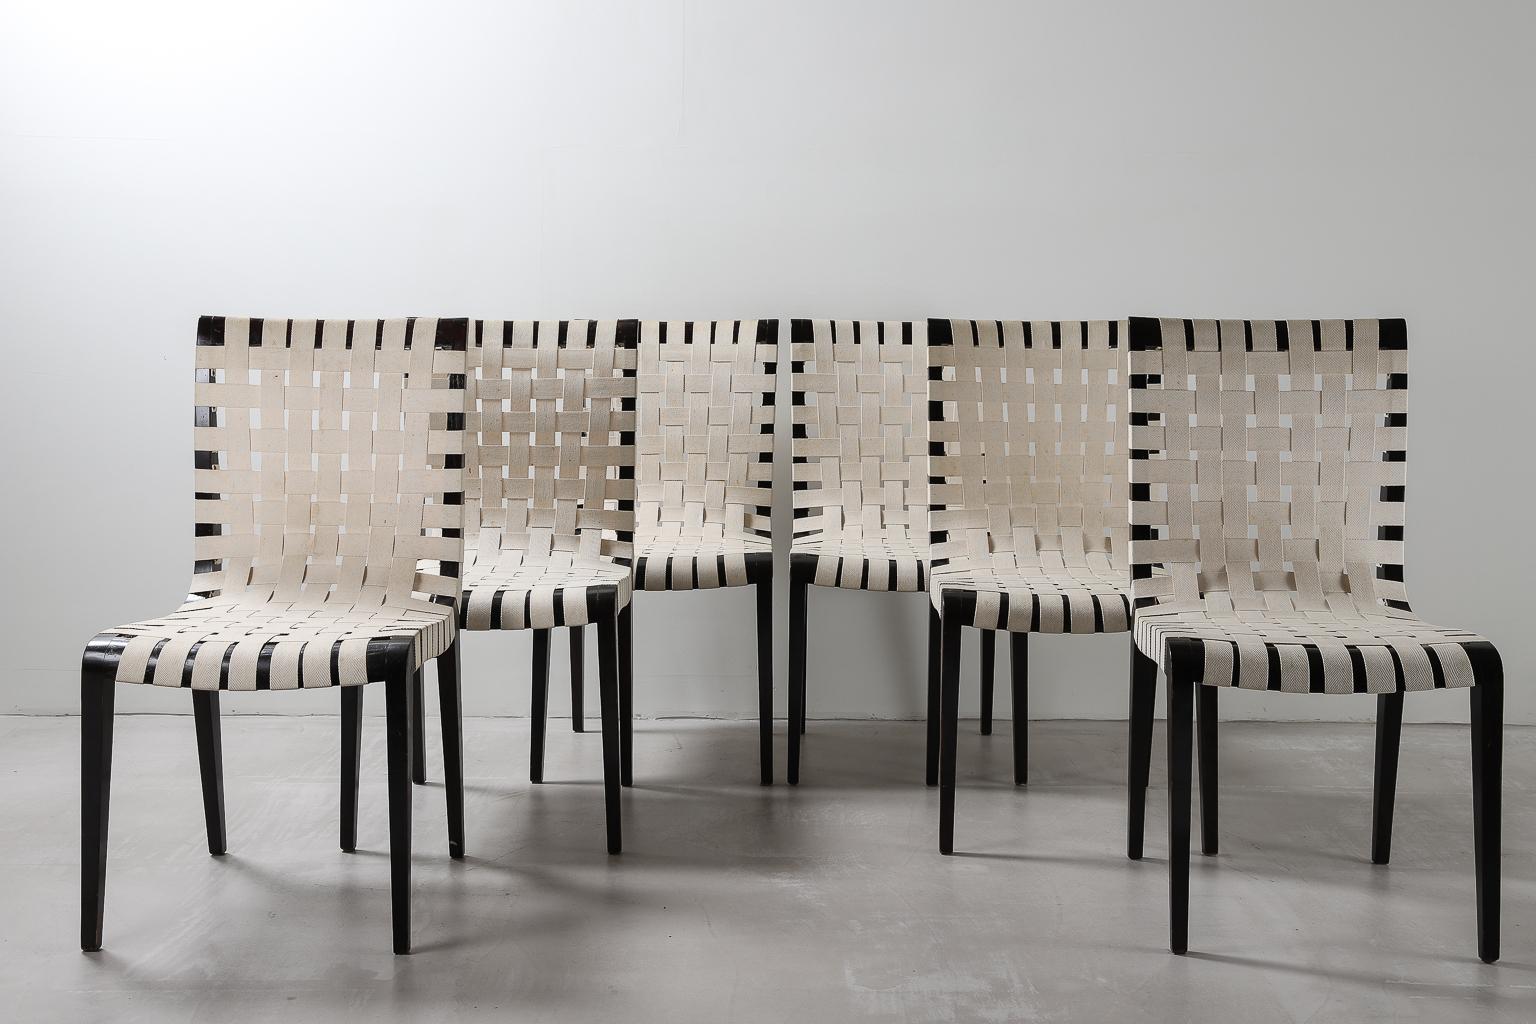 Set of 6 Augusto Romano chairs, Italy 1950s with wooden structure and fabric seats.